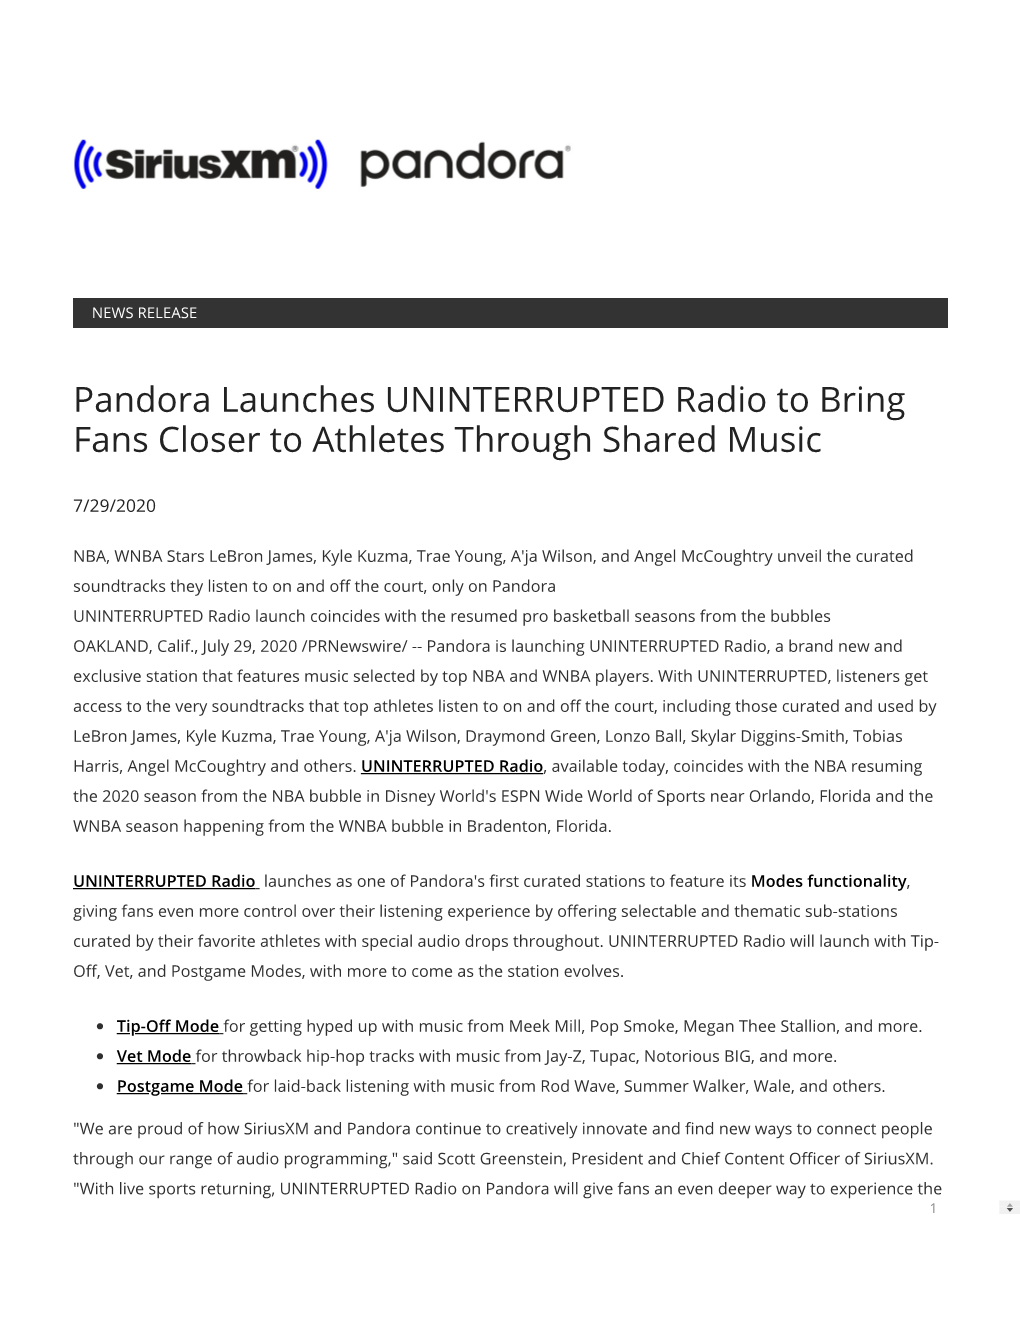 Pandora Launches UNINTERRUPTED Radio to Bring Fans Closer to Athletes Through Shared Music